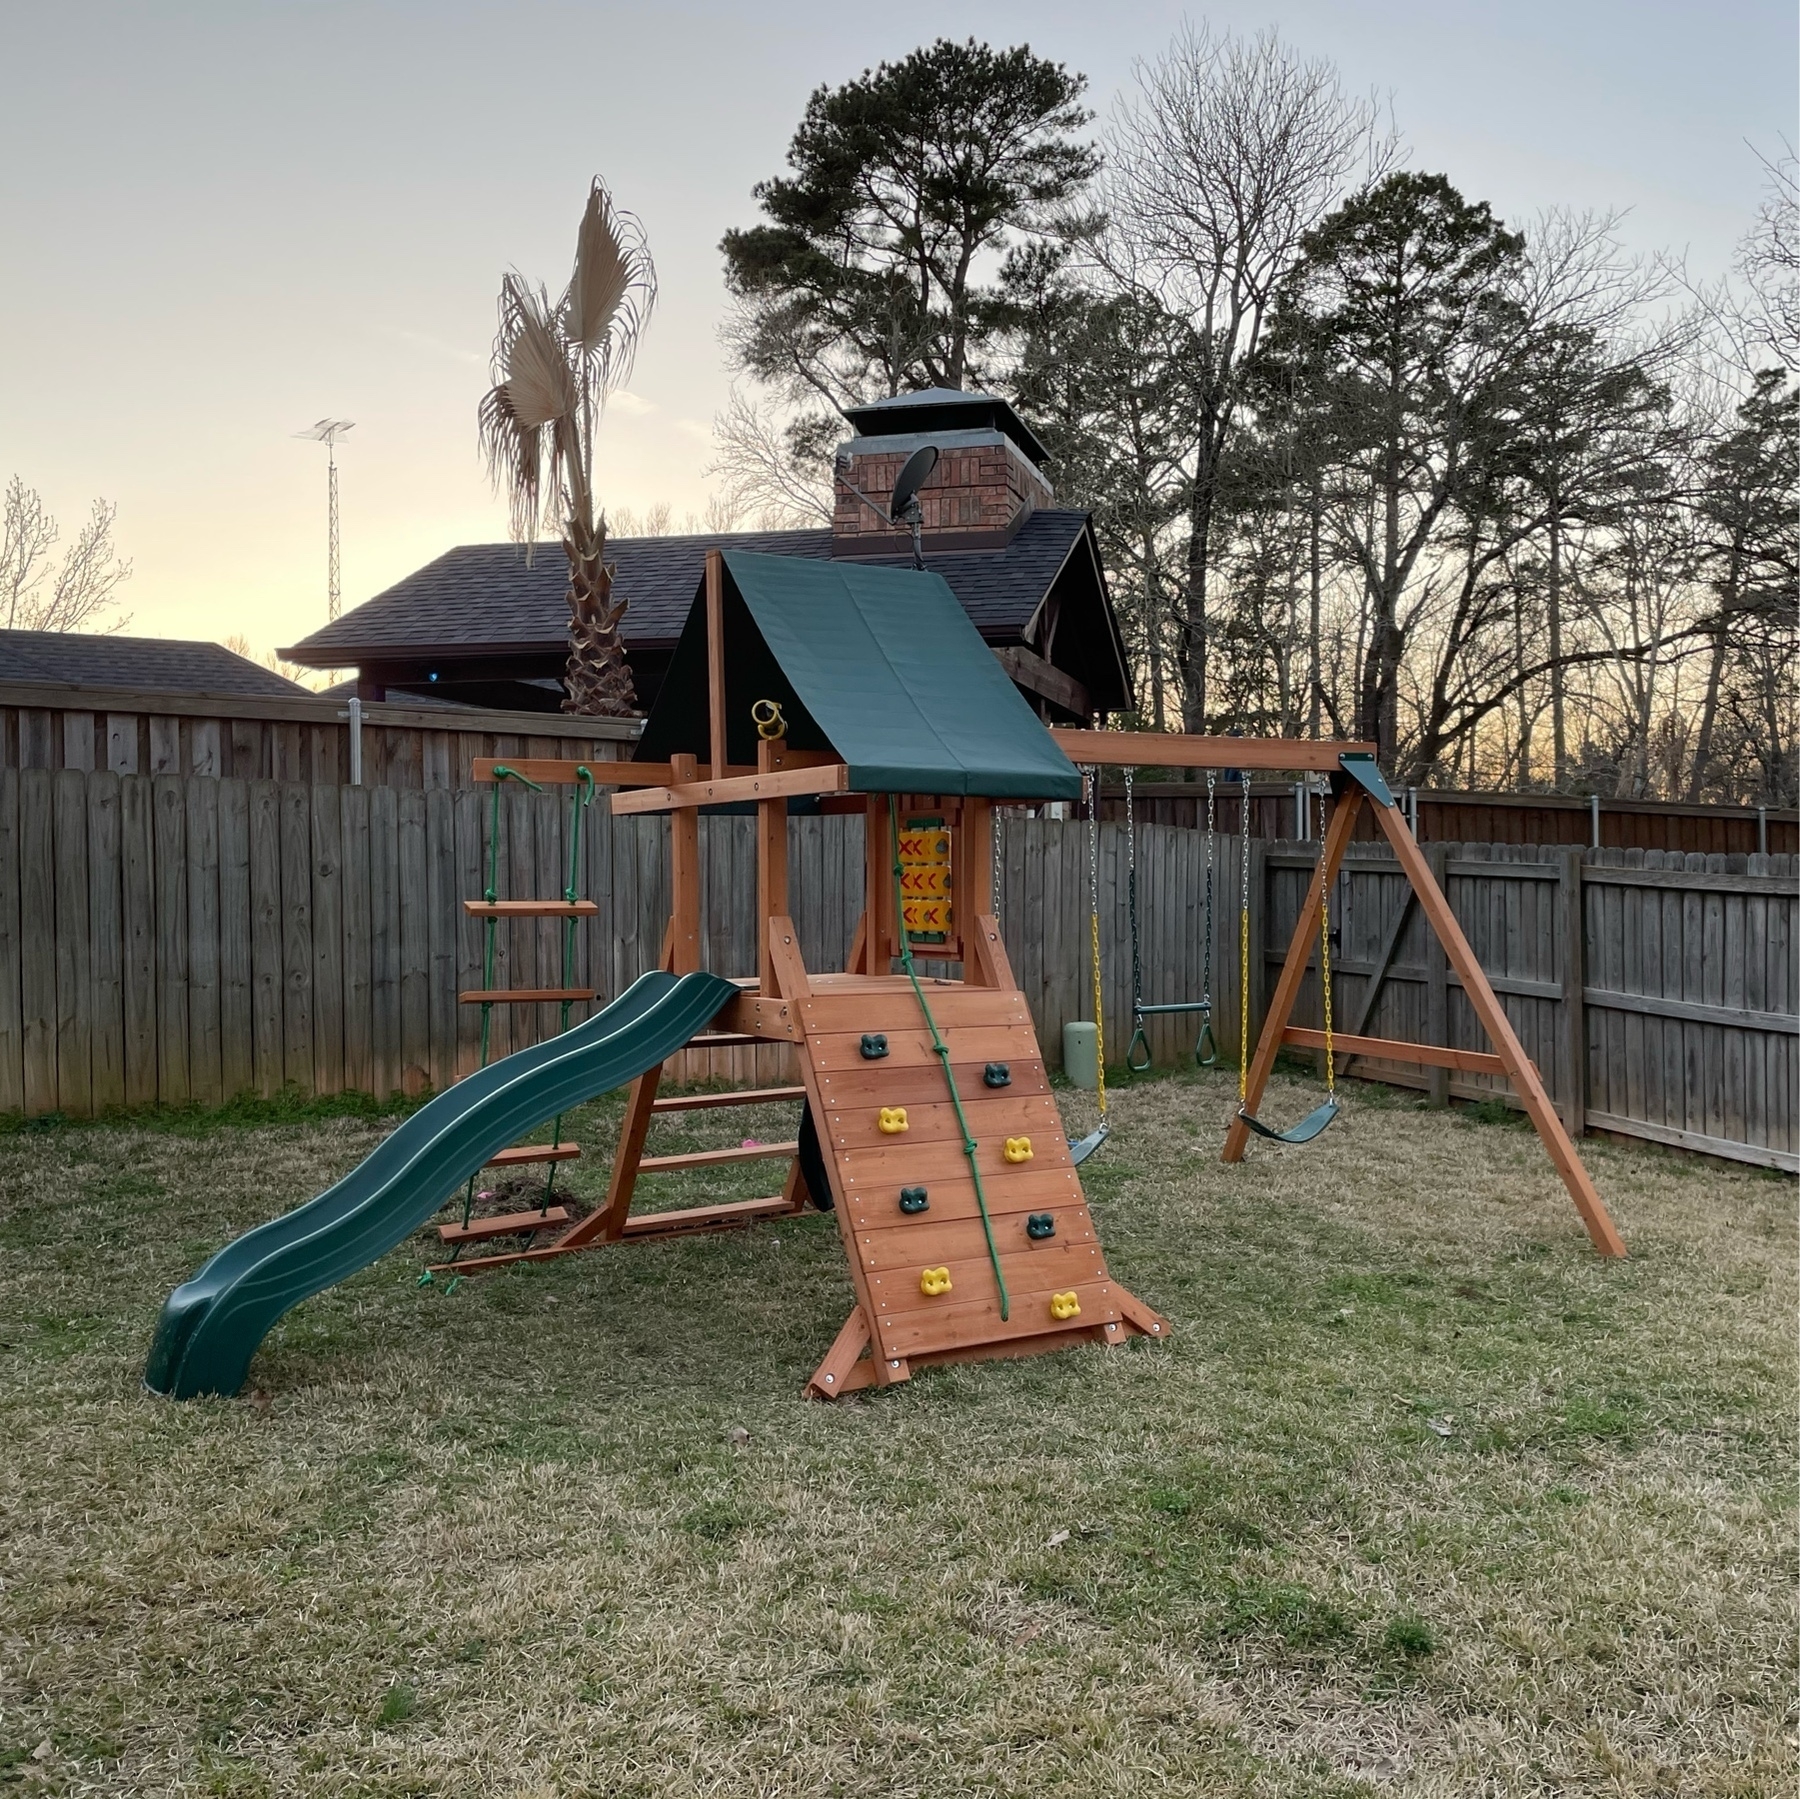 Assembled play structure